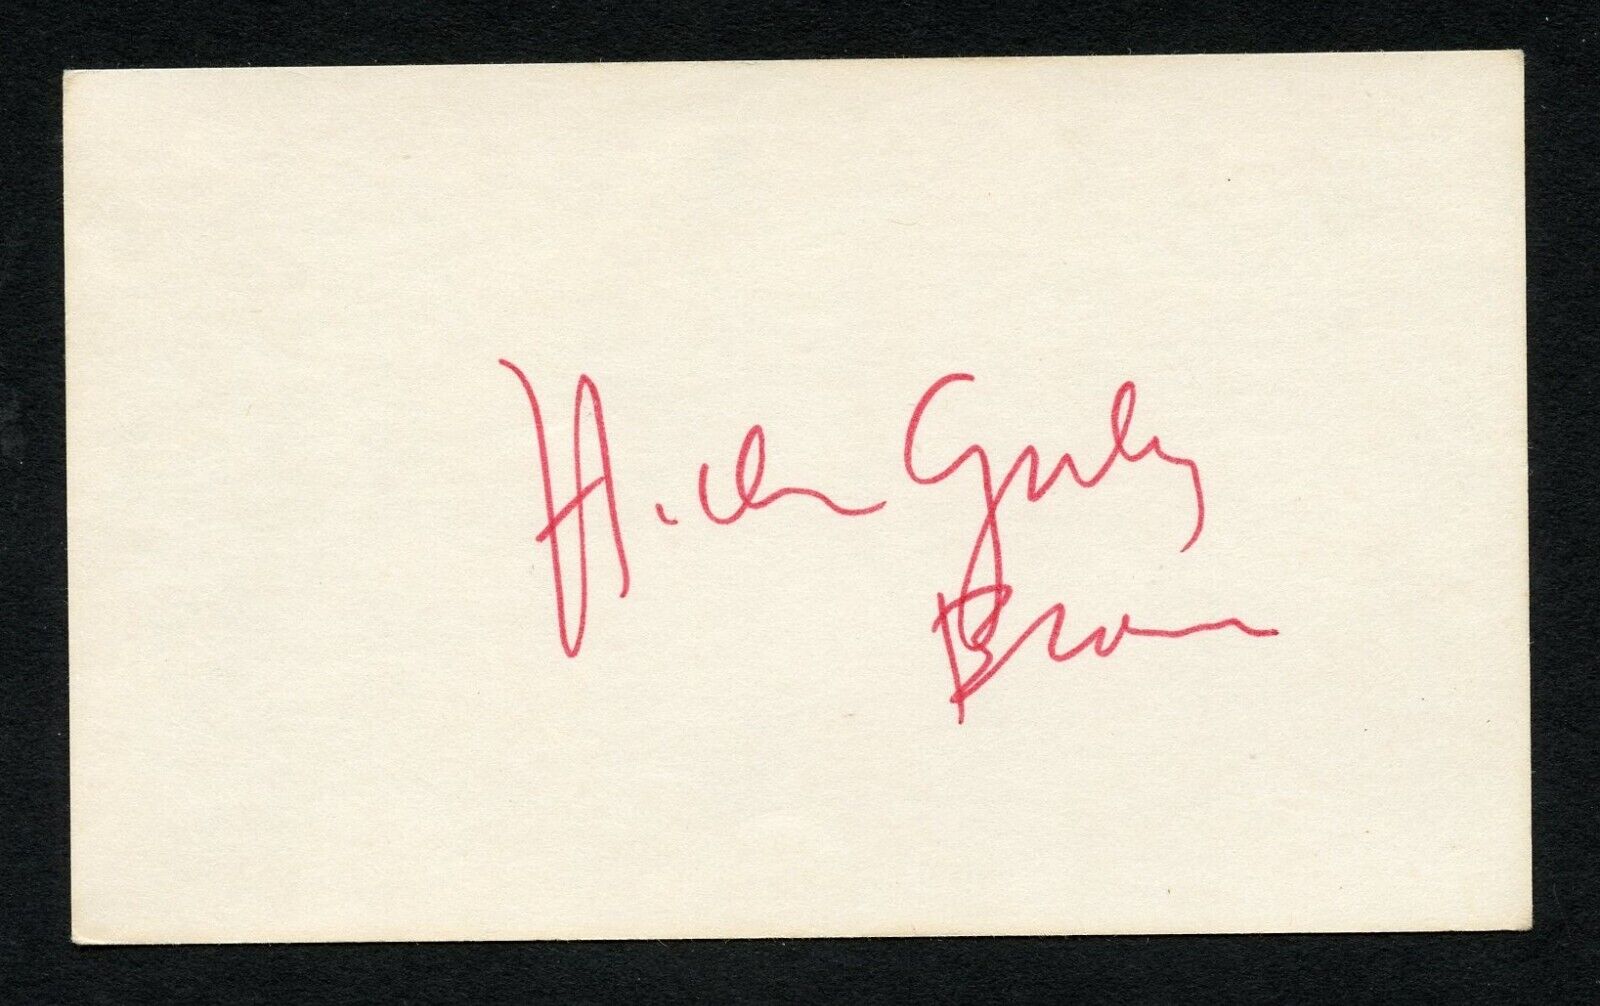 Helen Gurley Brown d2012 signed auto Vintage 3x5 Hollywood Author Sex & the Girl